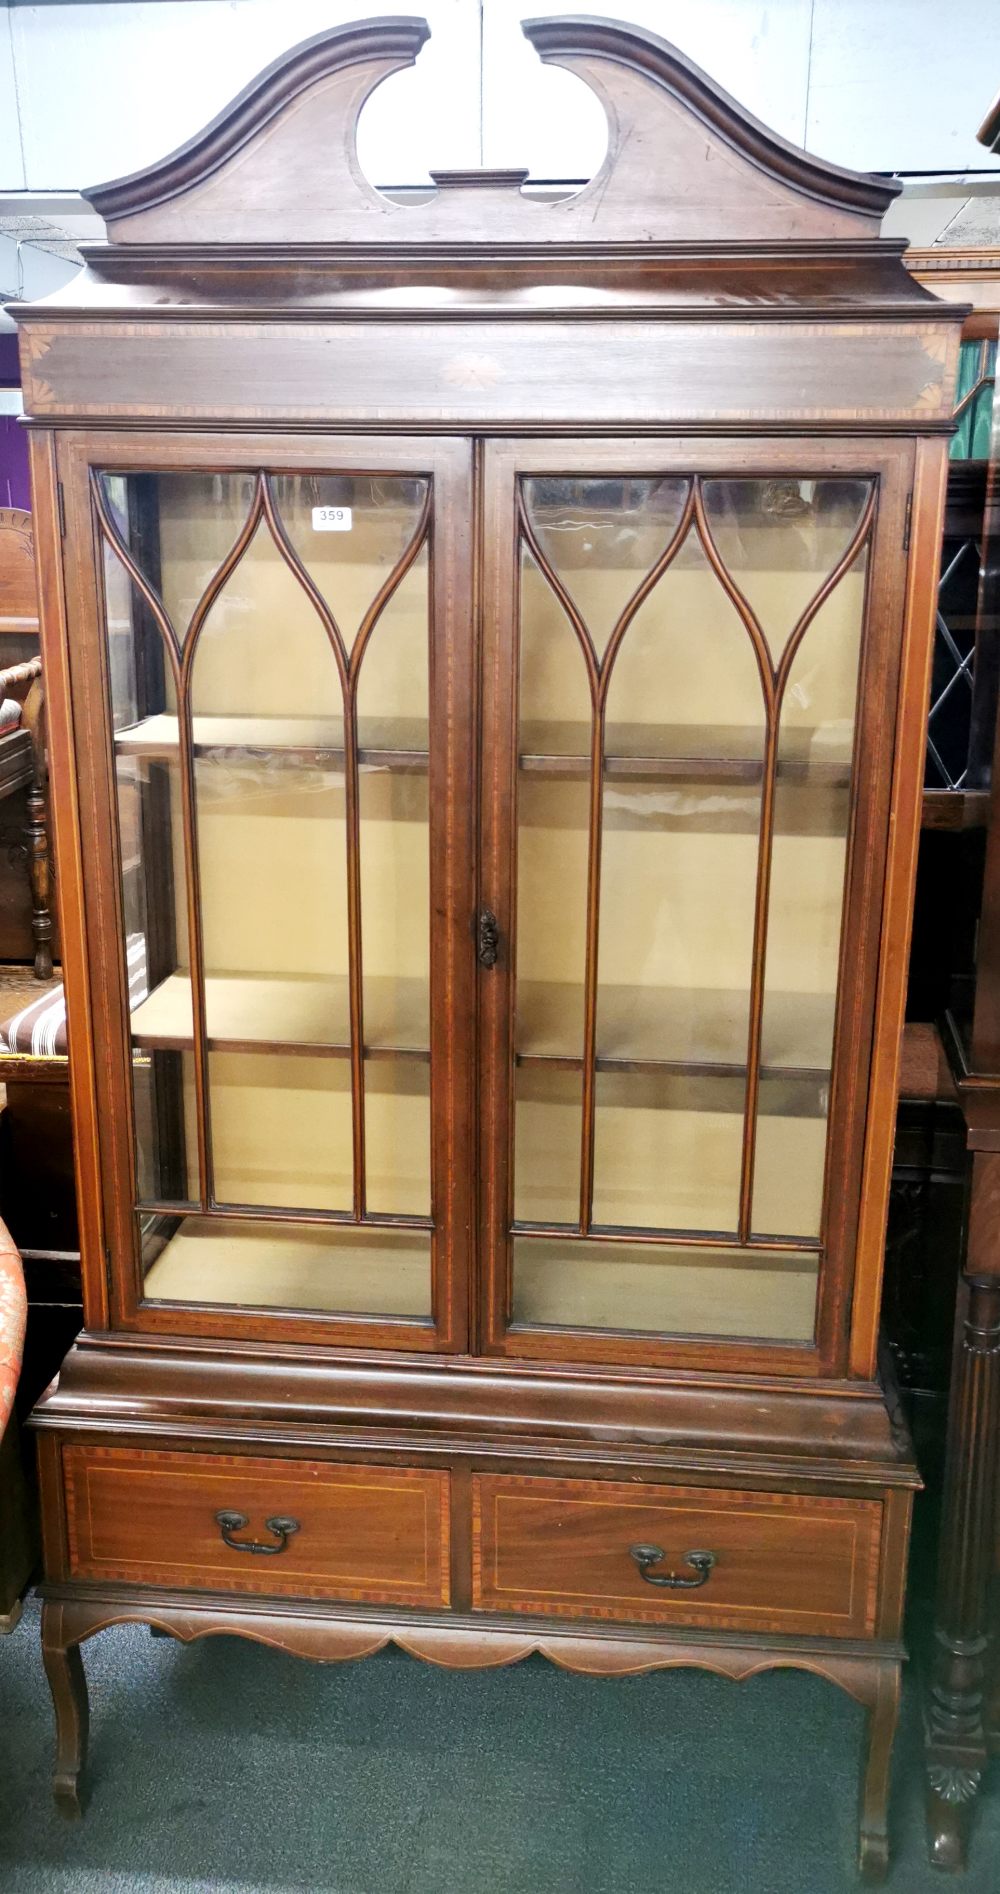 An inlaid mahogany display cabinet with two bottom drawers, 195 x 100 x 35cm.